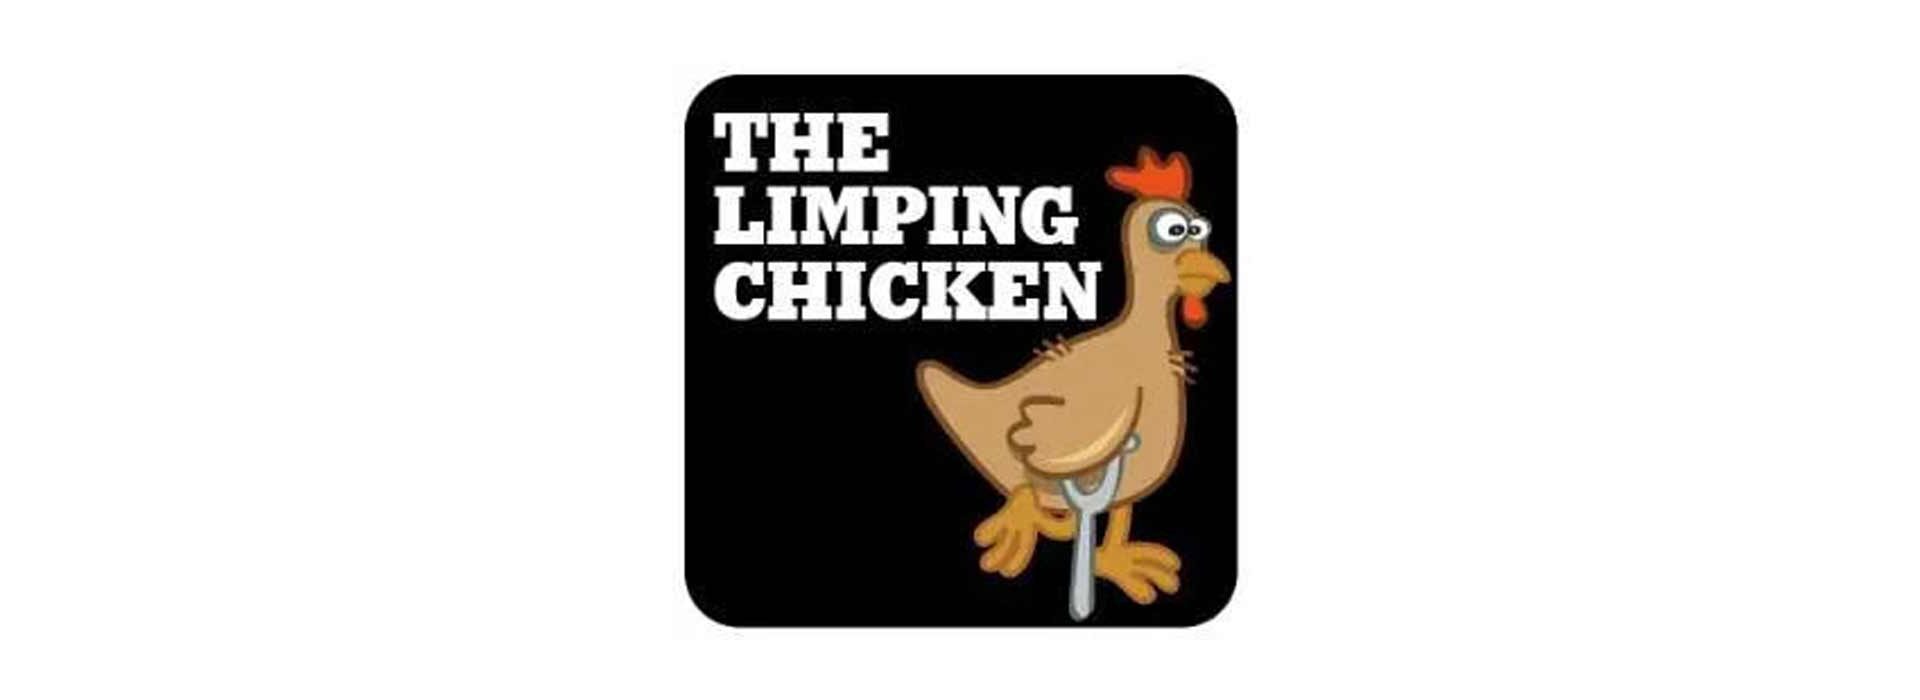 The Limping Chicken logo. A brown cartoon chicken with a crutch under one wing and standing on one leg.